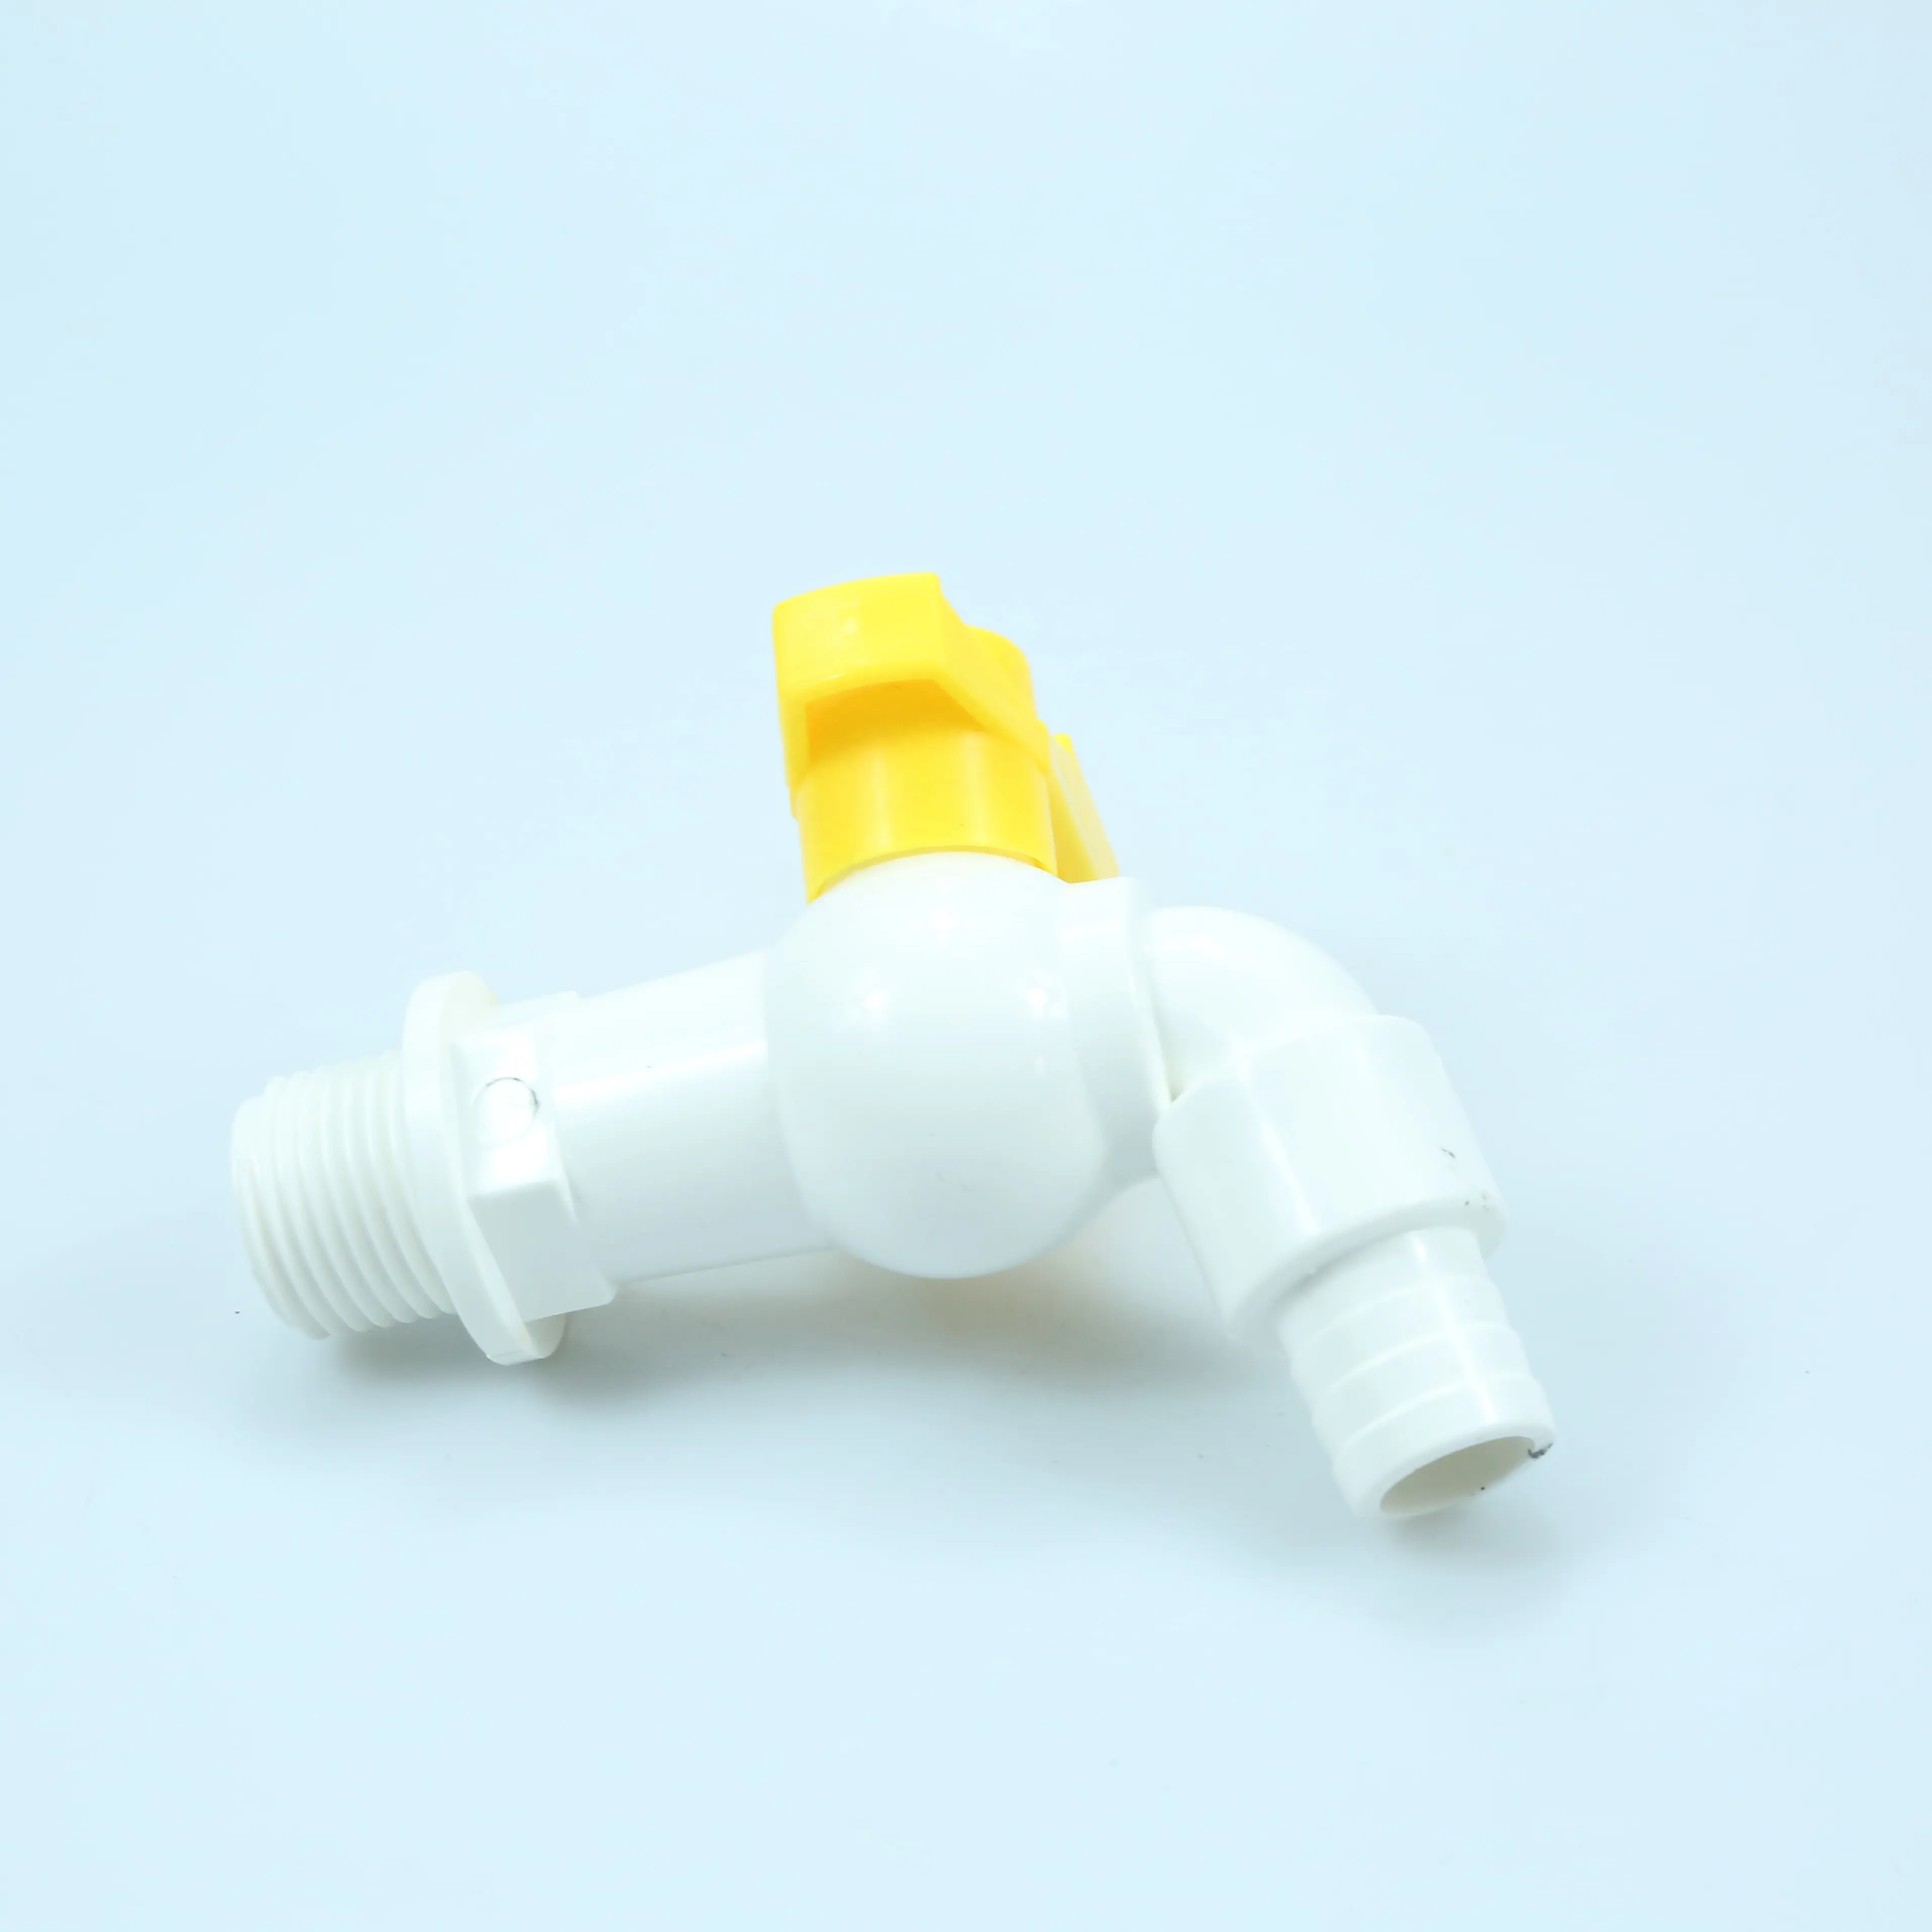 China supplier taps manufacturer easy installation 1/2' ~ 6' white pvc plastic taps faucet water tap